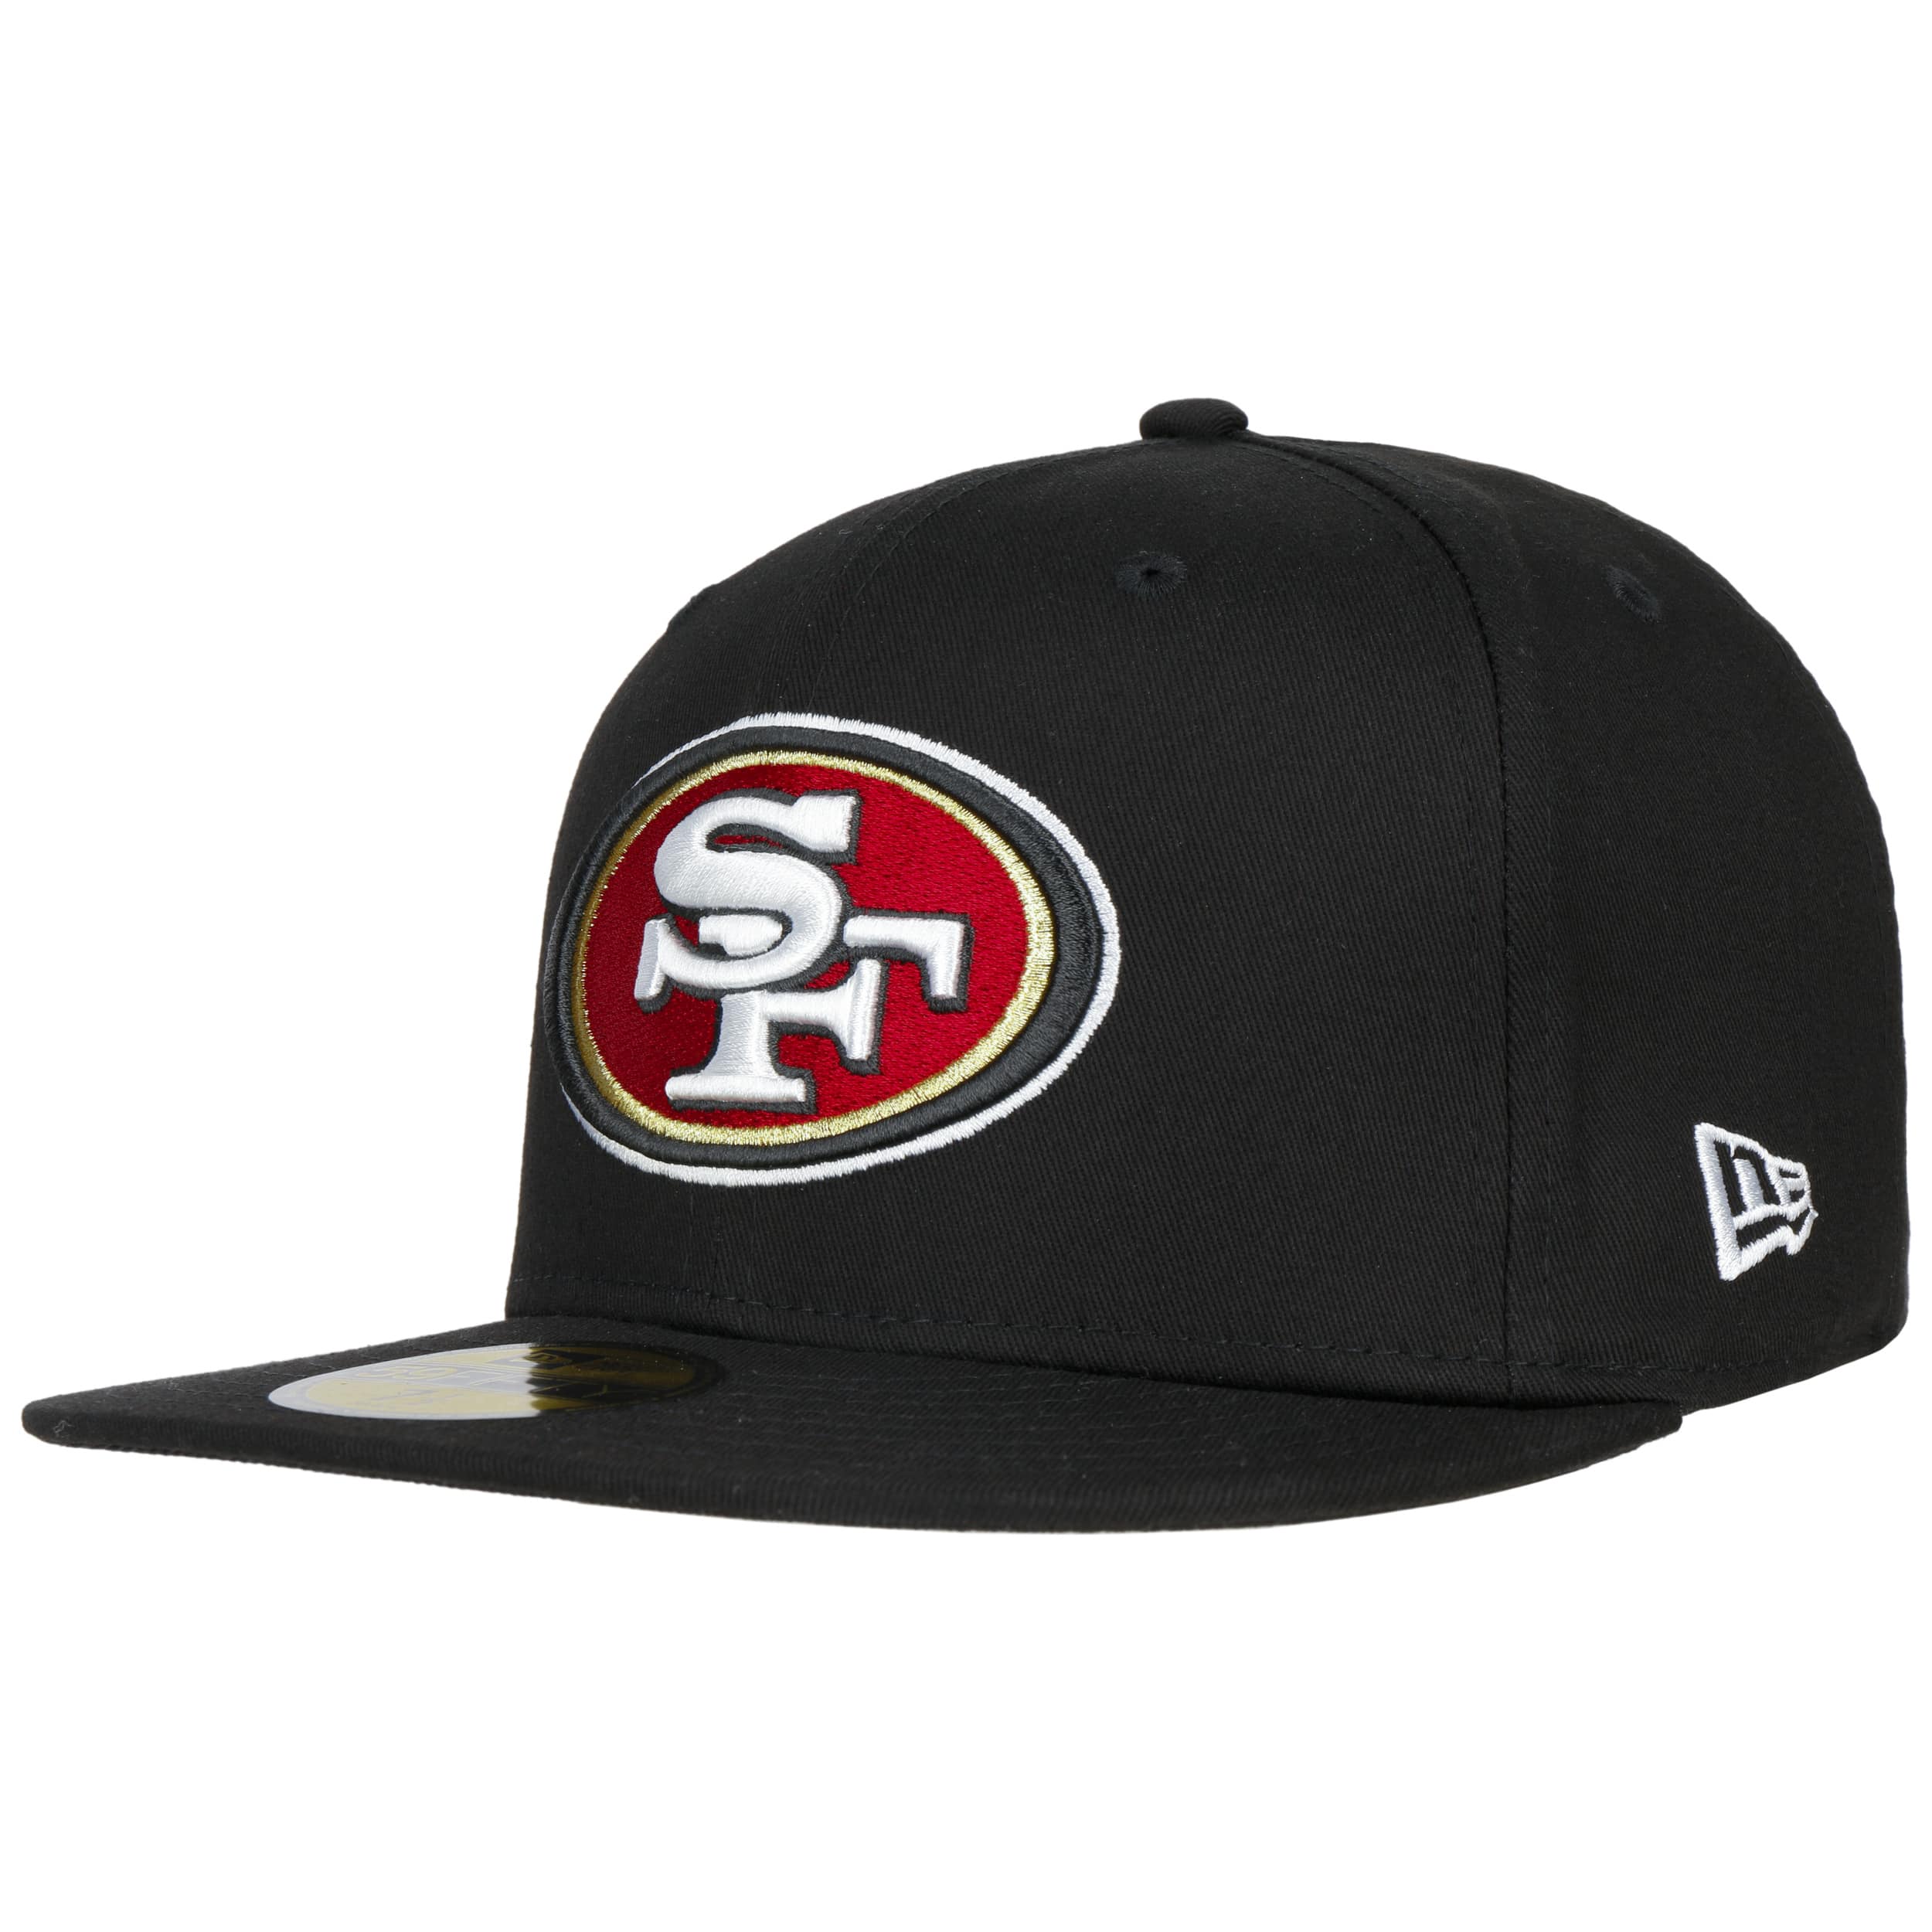 59Fifty NFL 49ers Side Patch Cap by New Era